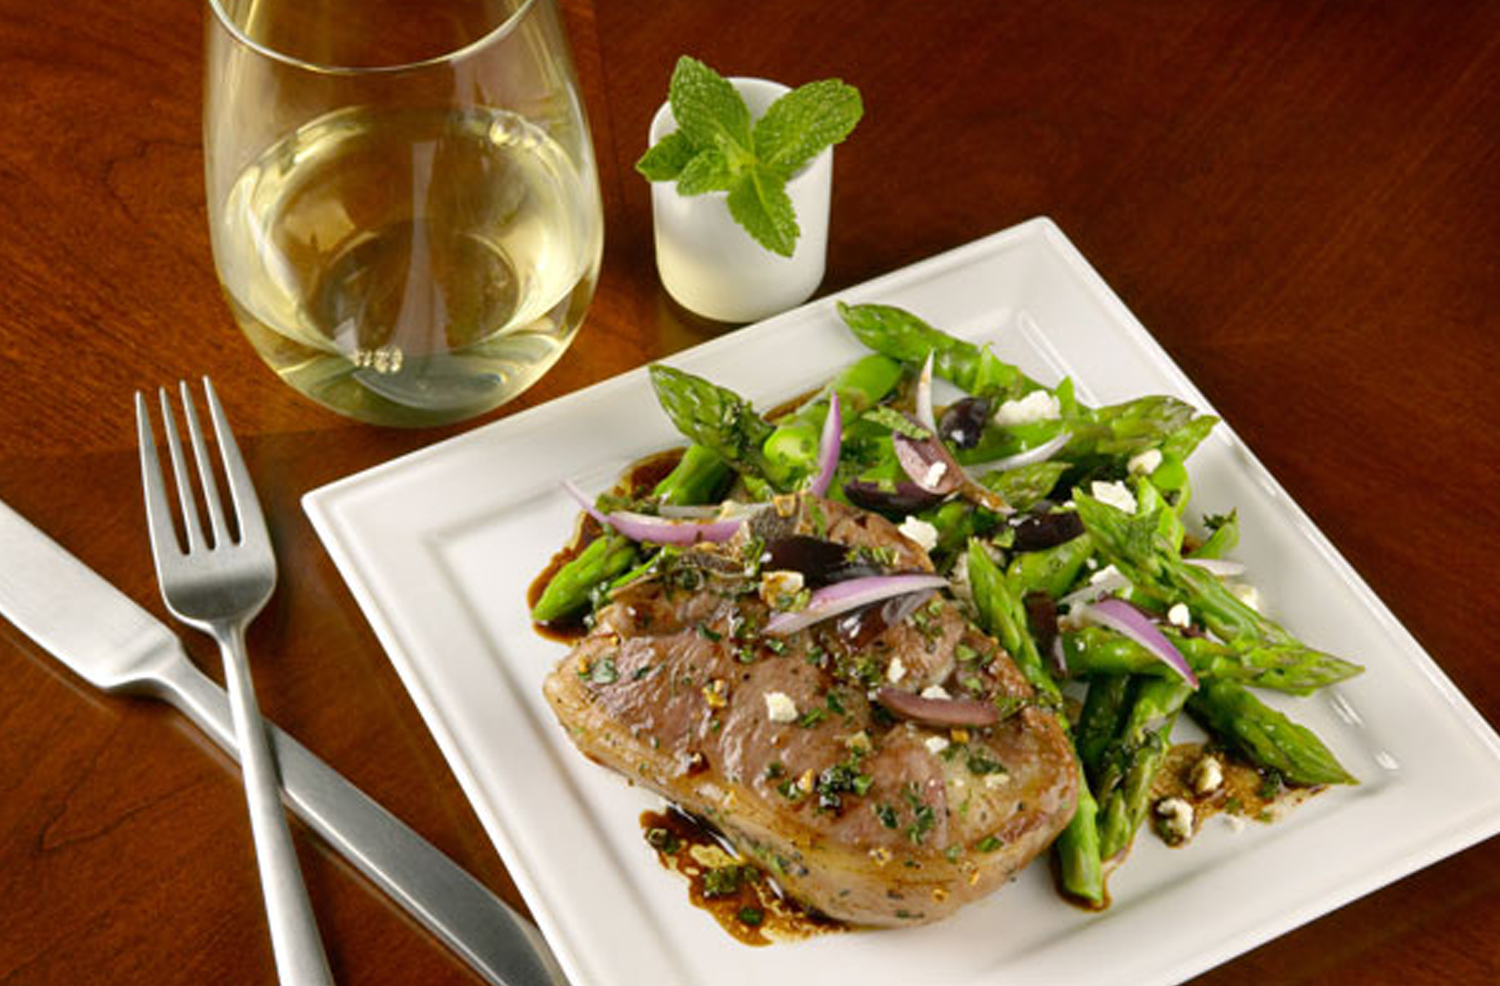 Warm Salad of Asparagus Spears and Seared Lamb Chops with Fresh Mint Vinaigrette